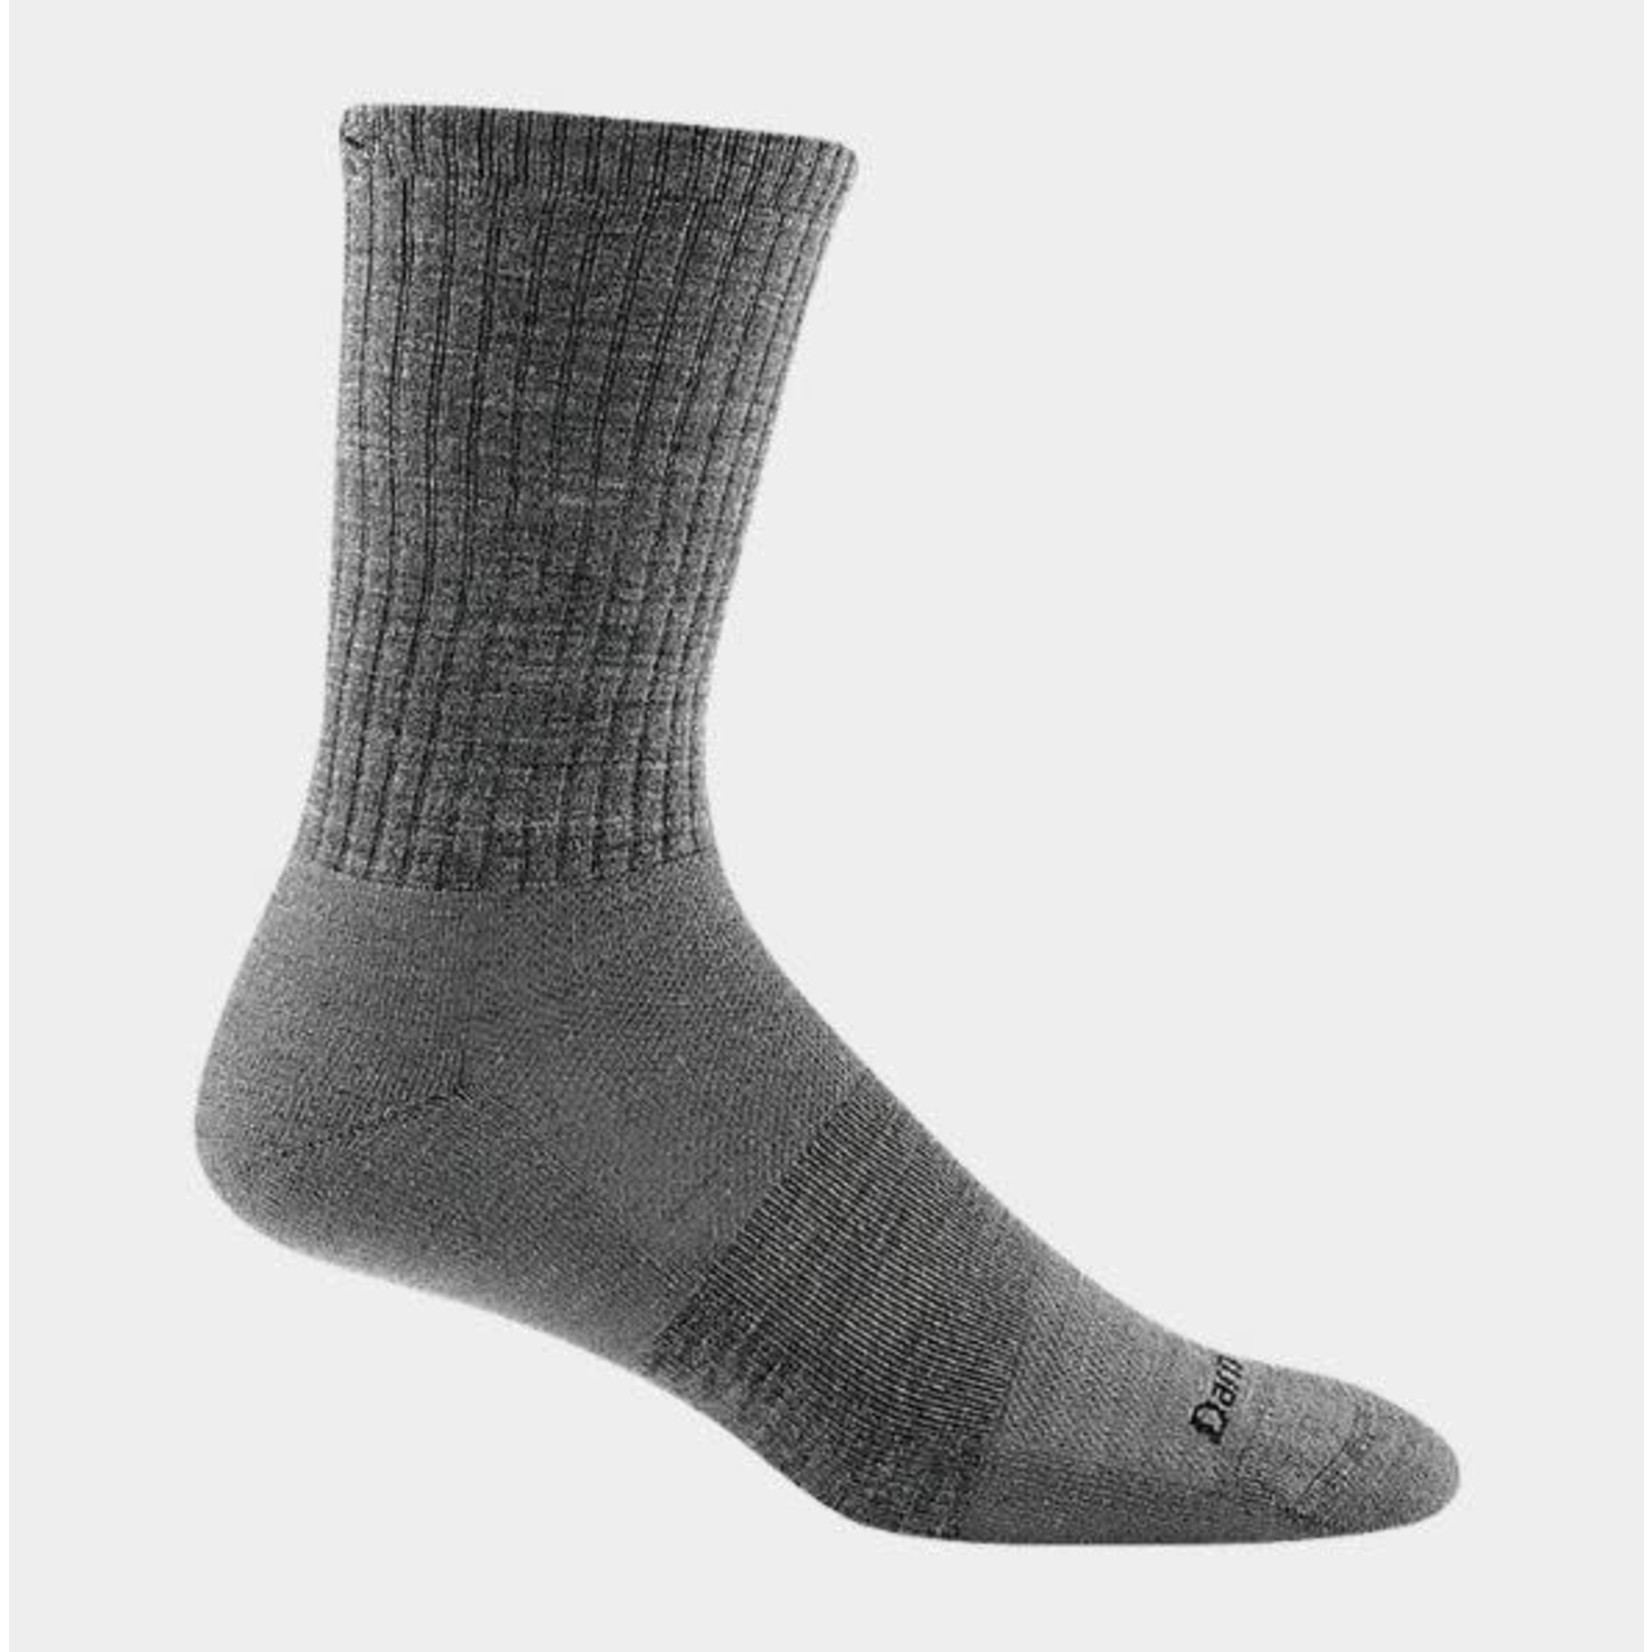 Making the Most Comfortable Socks with Merino Wool – Darn Tough